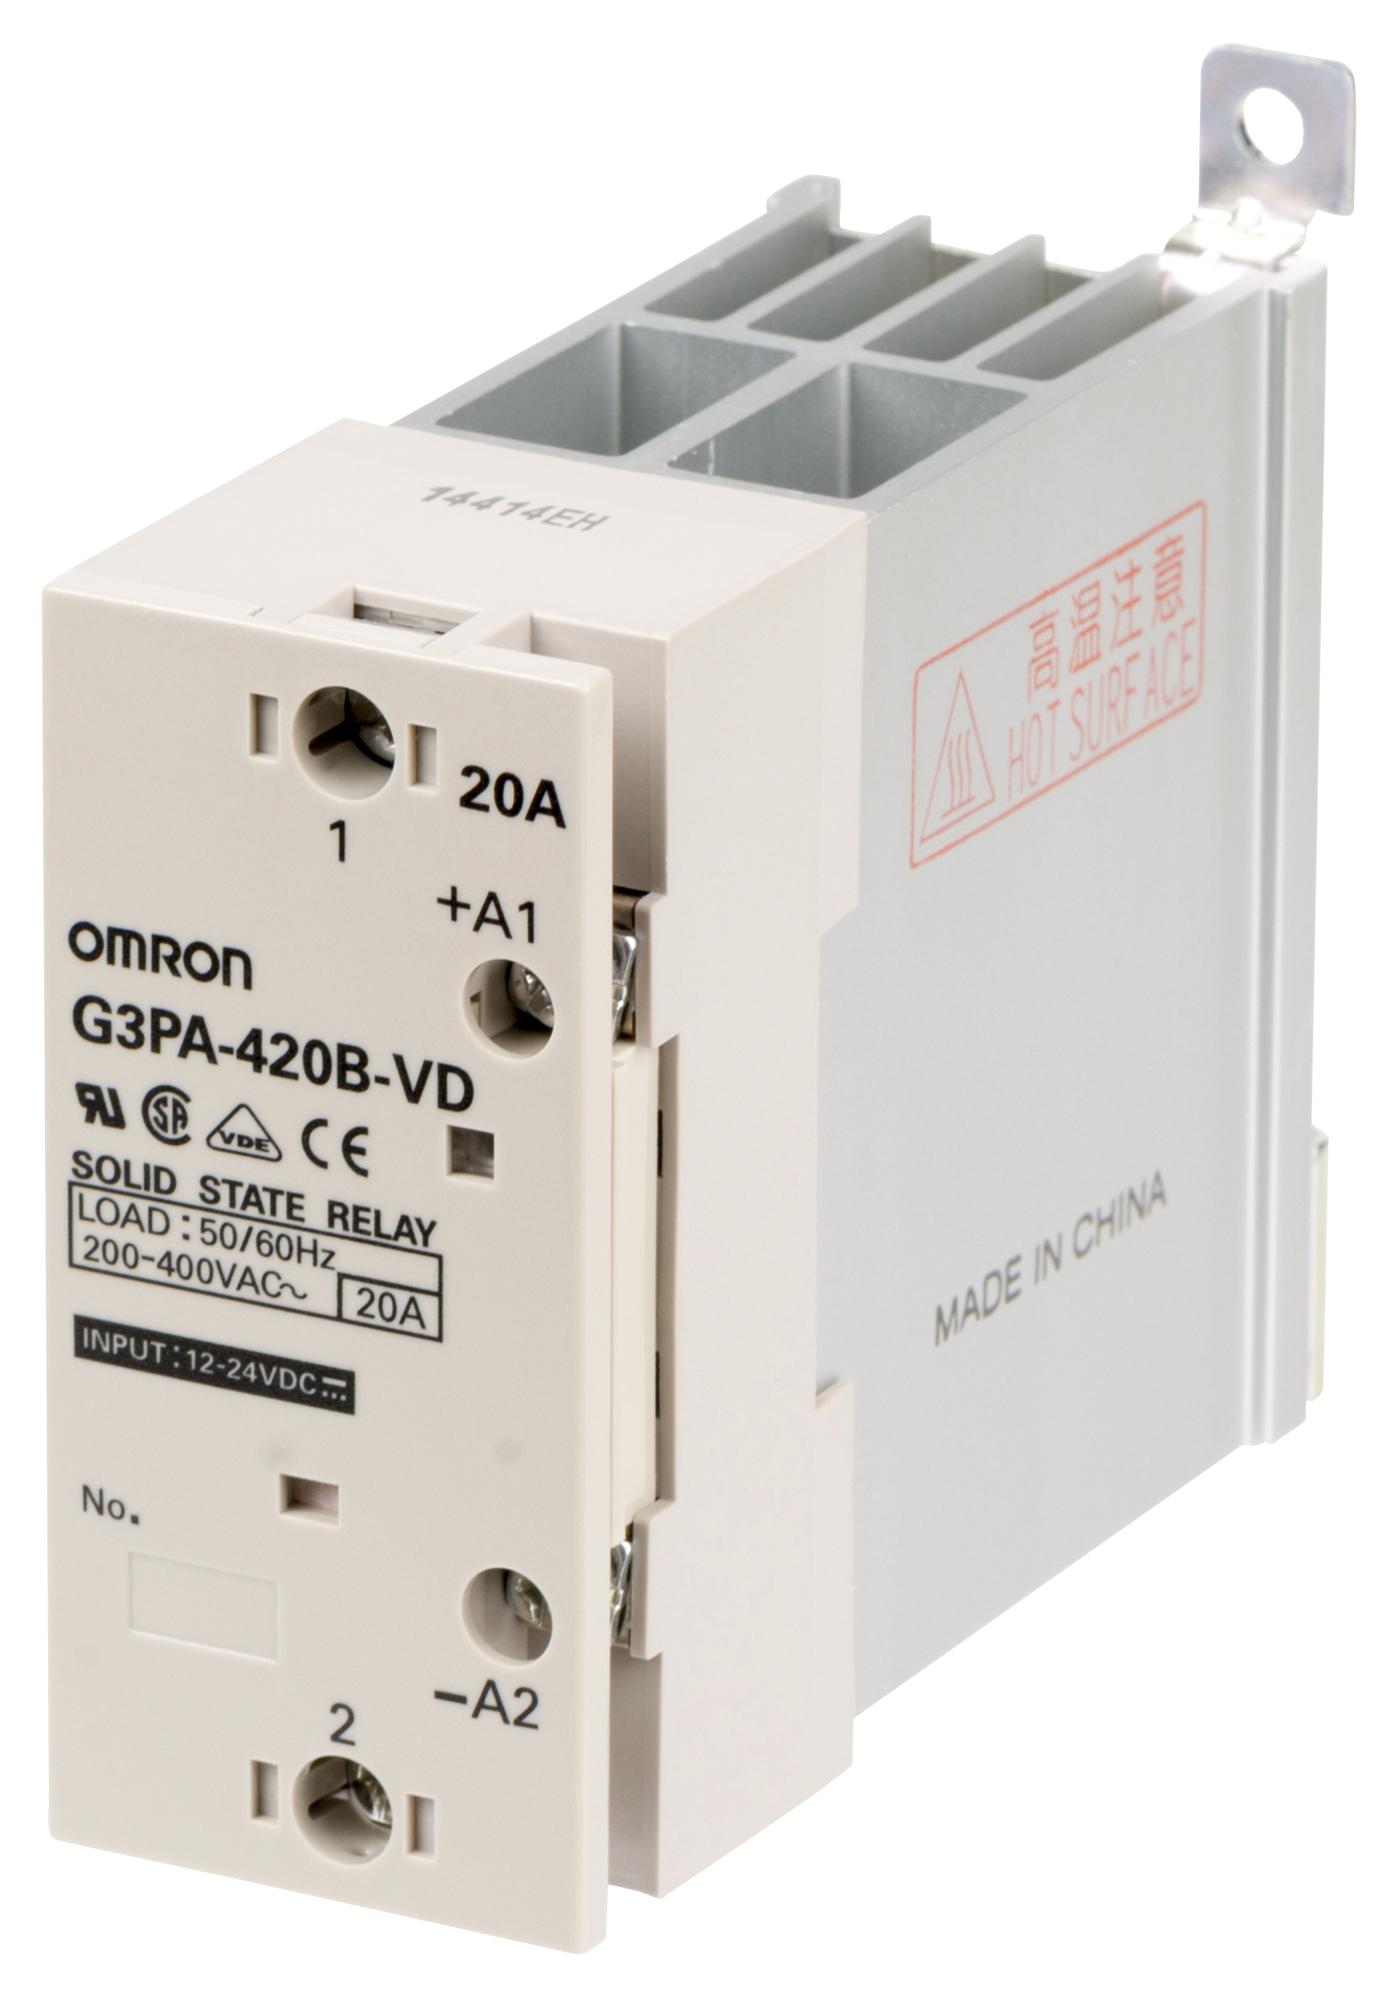 G3PA-420B-VD-2 12-24VDC SOLID STATE RELAYS OMRON